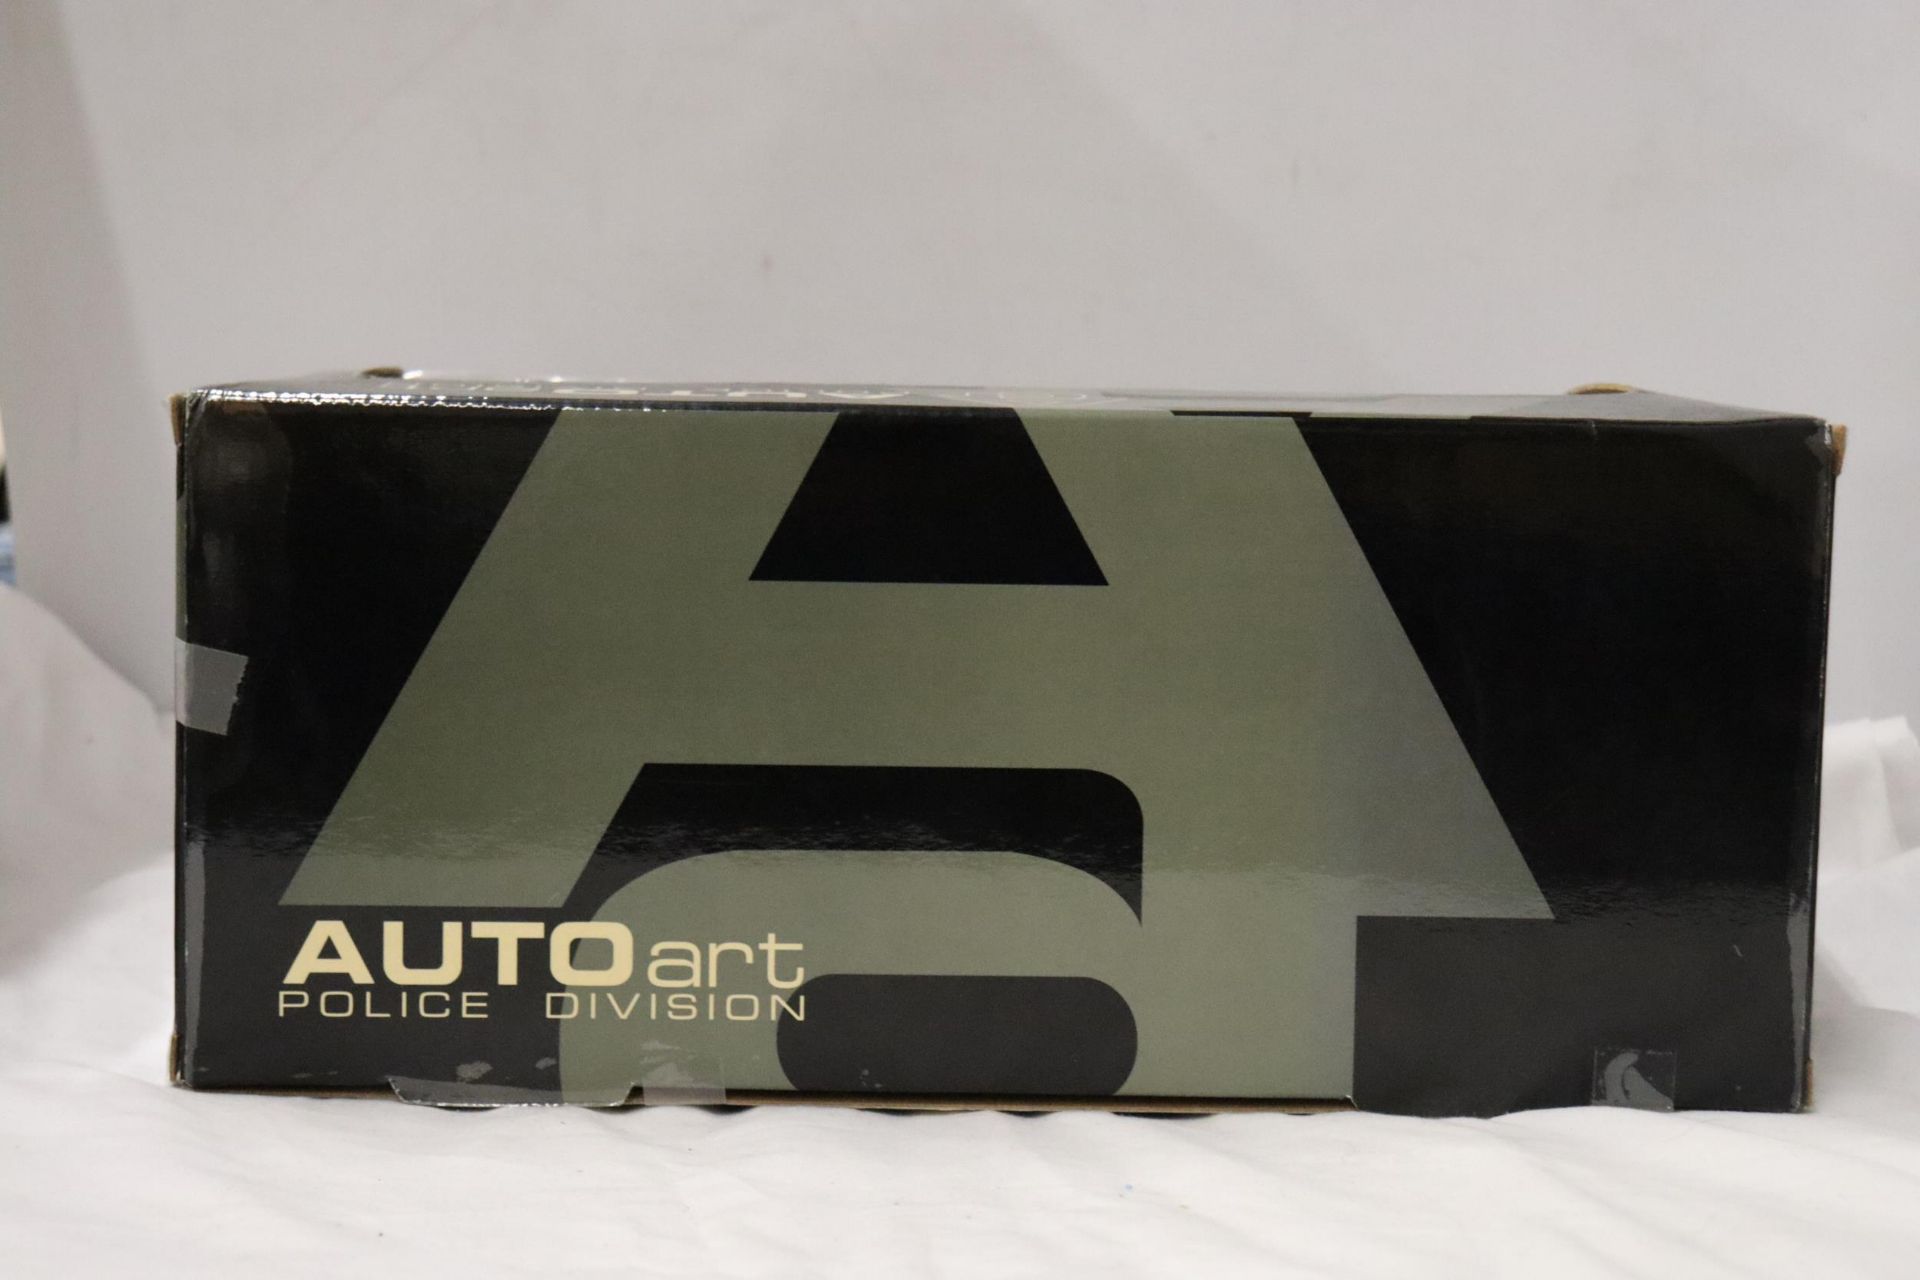 AN AUTO ART, POLICE DIVISION CAR, SCALE 1:18, AS NEW IN BOX - Image 6 of 7